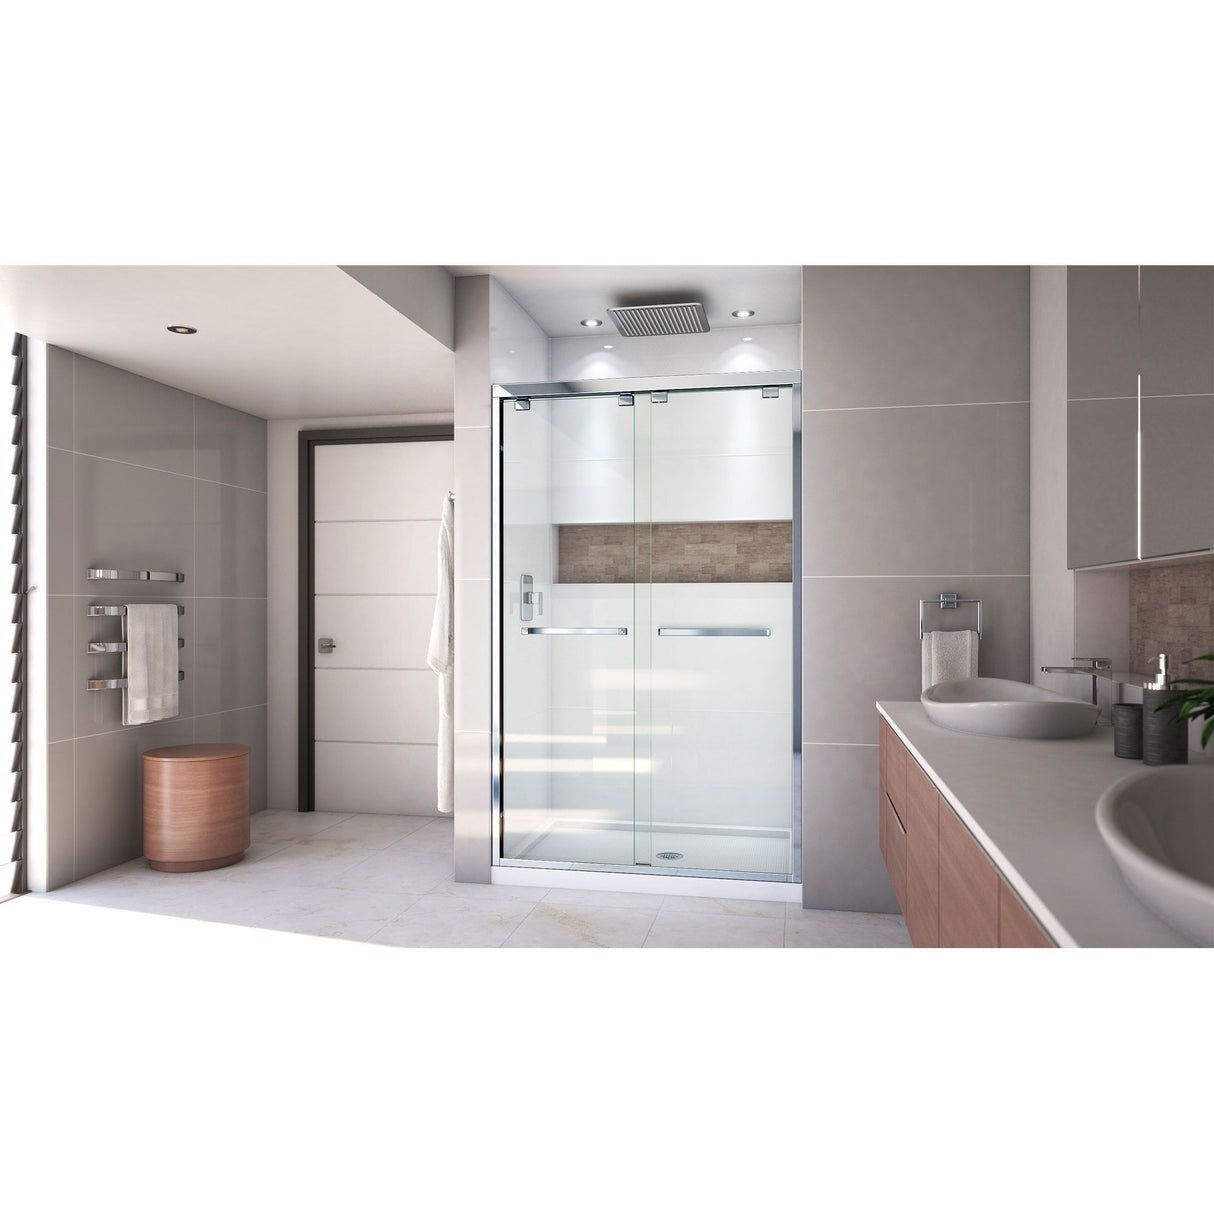 DreamLine Encore 32 in. D x 48 in. W x 78 3/4 in. H Bypass Shower Door in Chrome and Center Drain White Base Kit